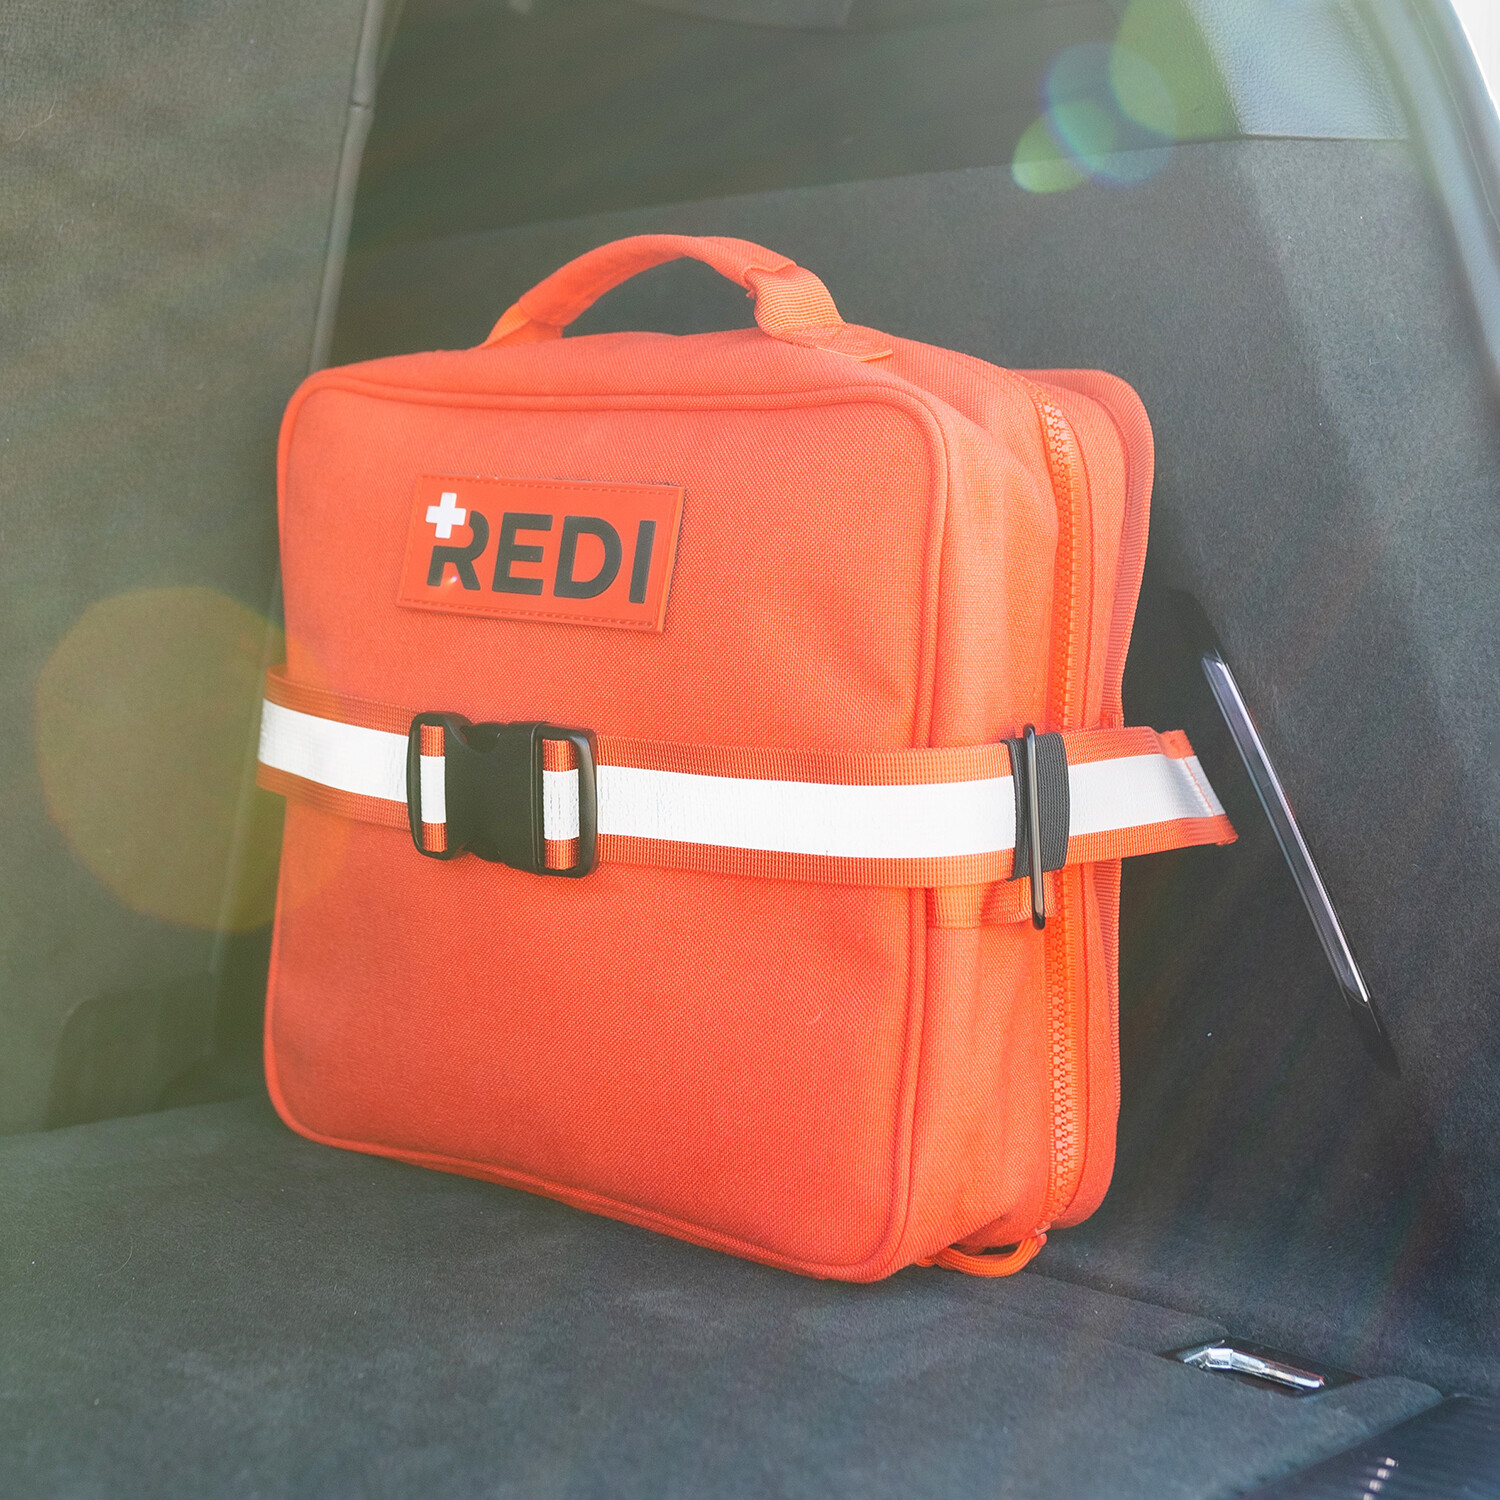 Roadie // First-Aid Kit For Your Vehicle - Redi Roadie First-Aid Kit ...